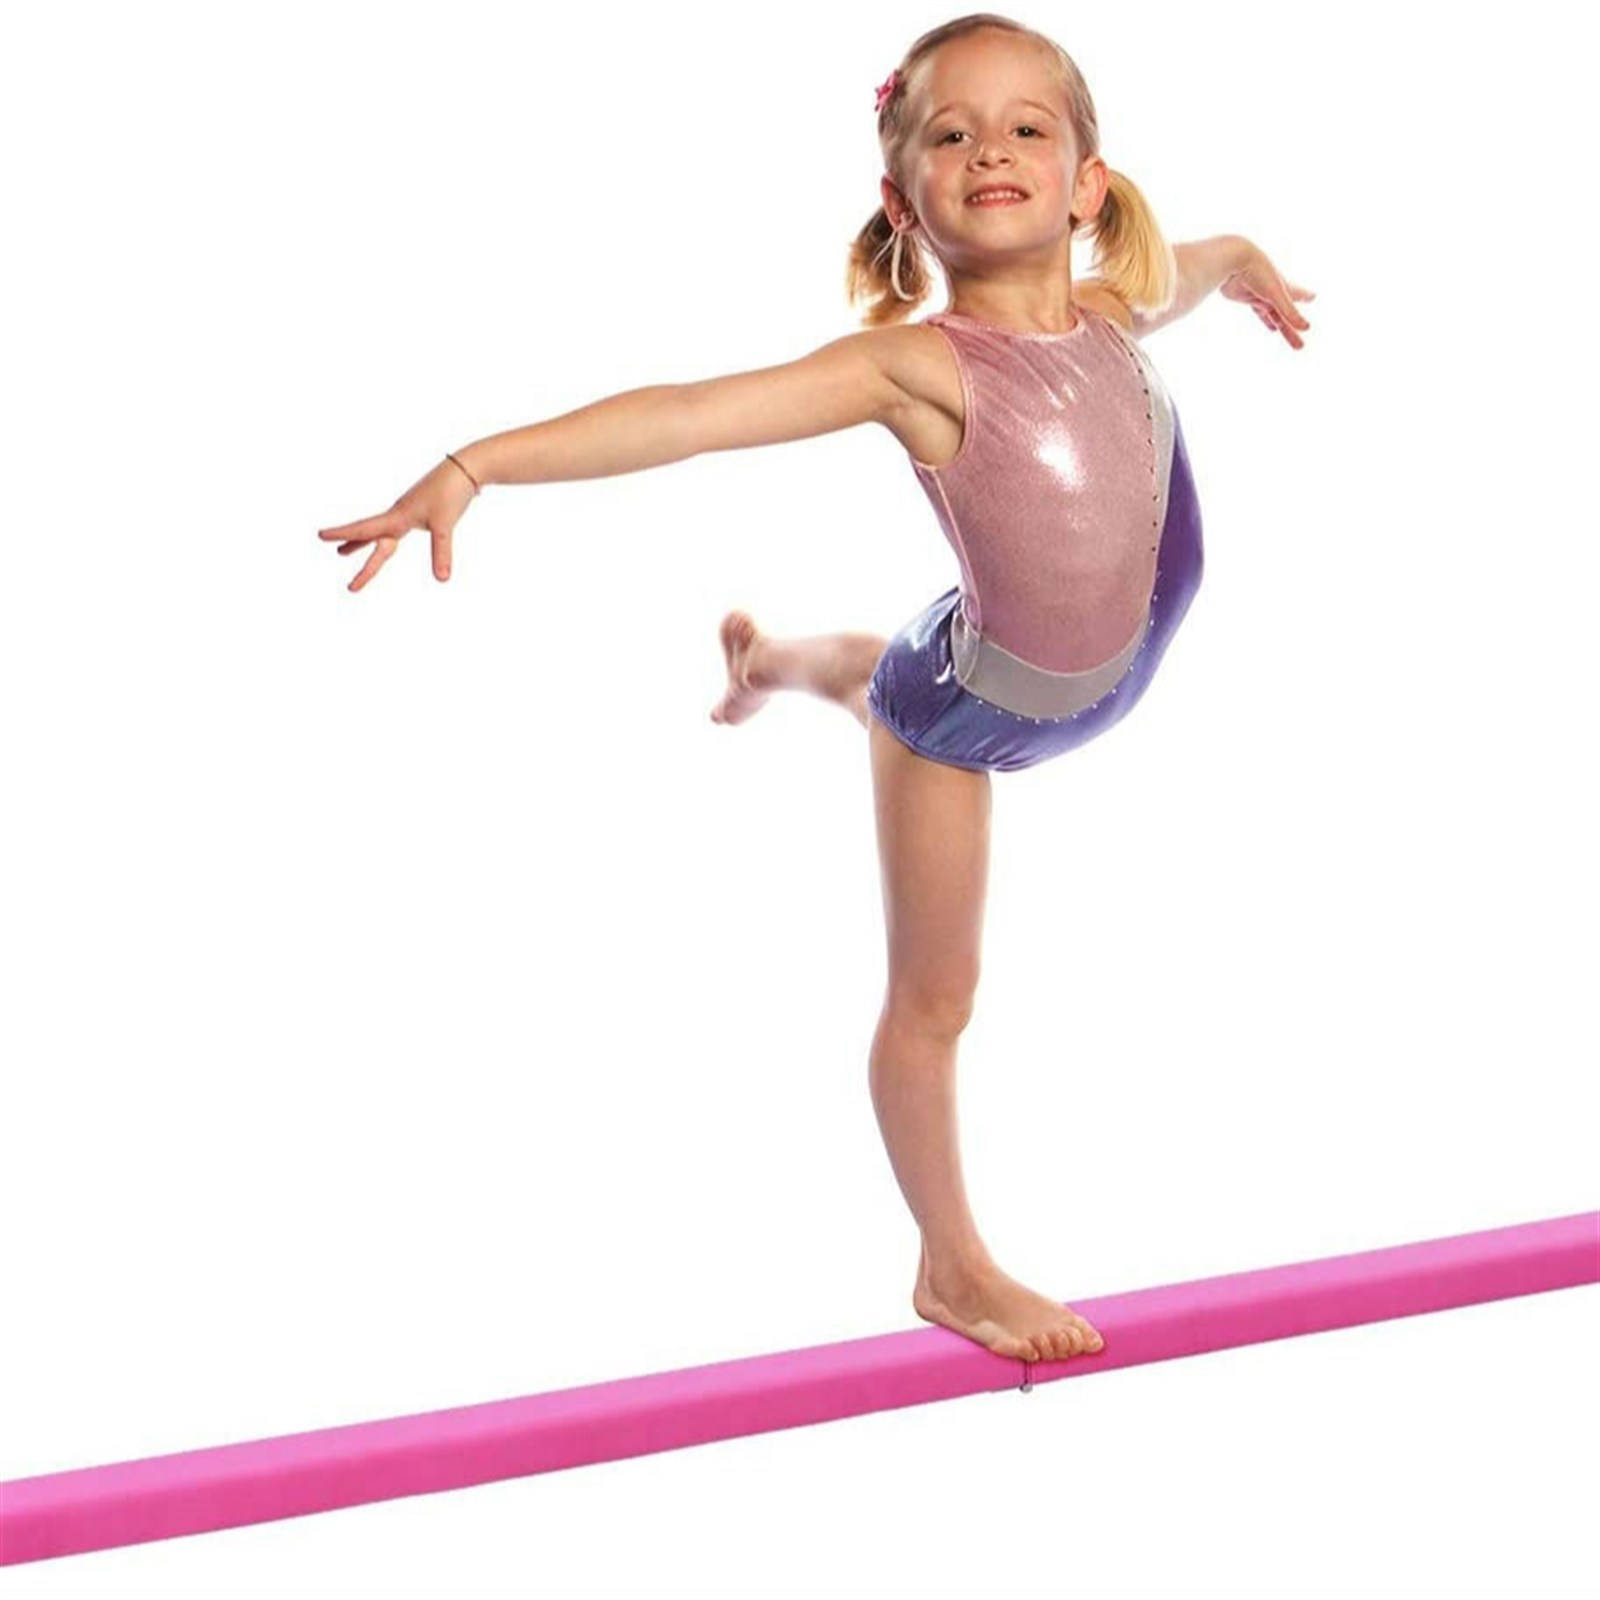 Young Level 4 Gymnasts On Balance Beam Wallpaper